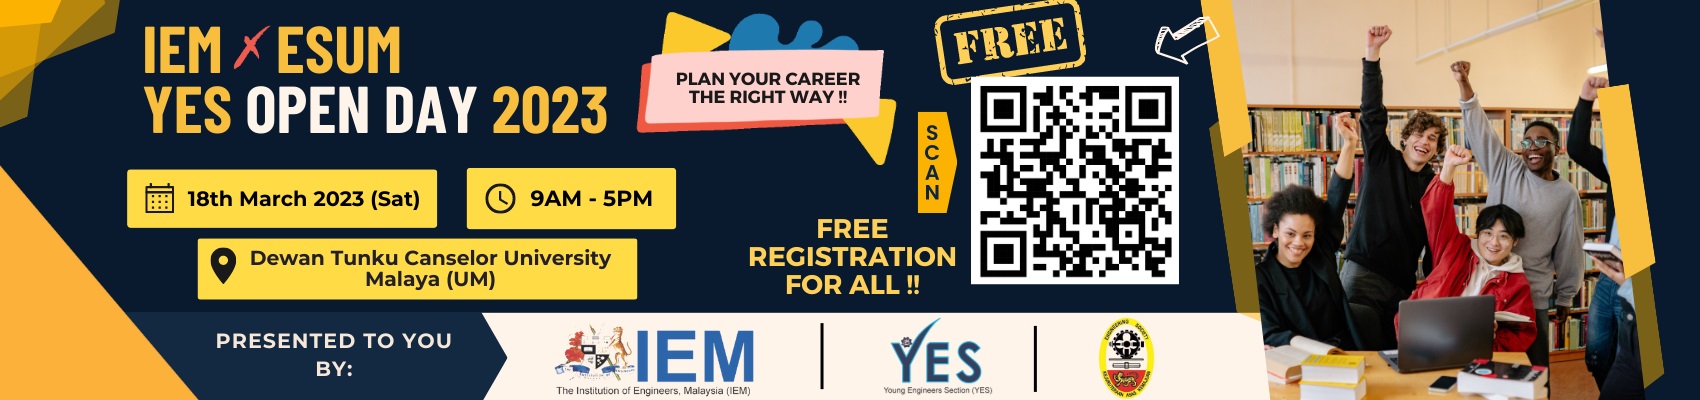 IEM X ESUM YES Open Day 2023 - ‘Plan Your Career the Right WAY!’